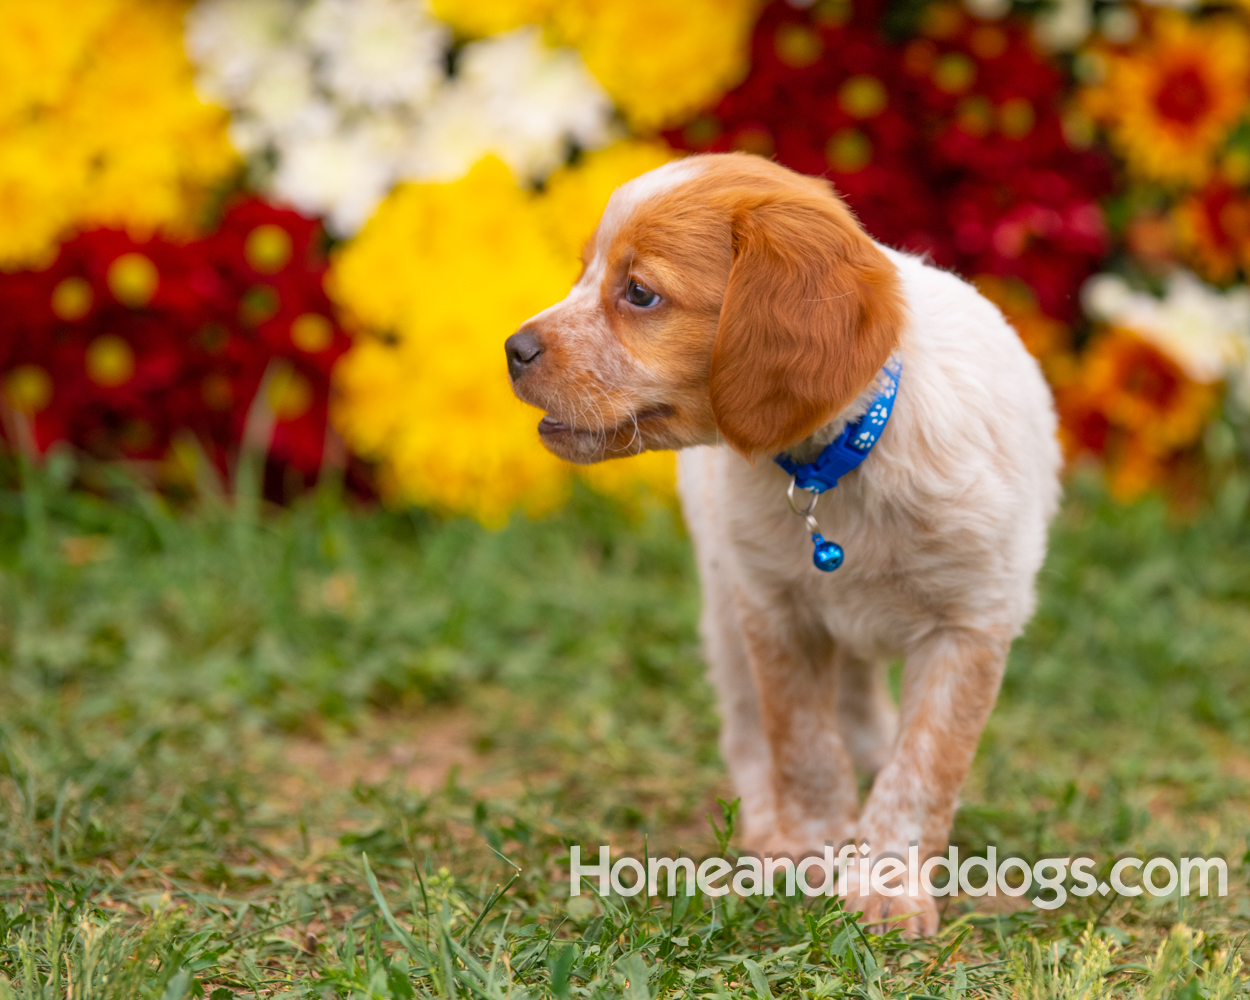 French Brittany puppies for sale playing in the grass in front of flowers